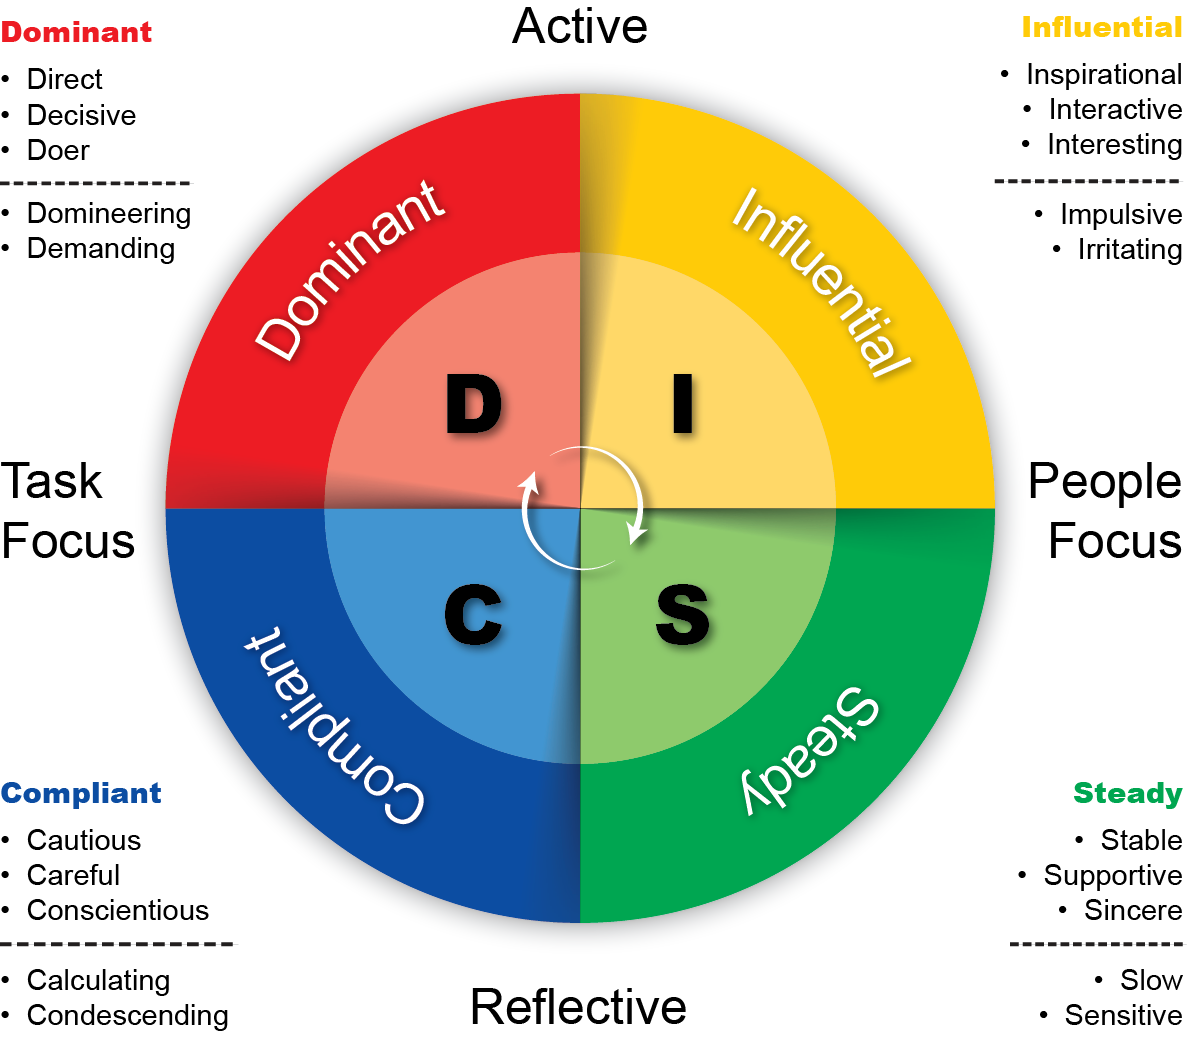 How the DiSC model can help your behavioral sales | by Salesbox | Medium